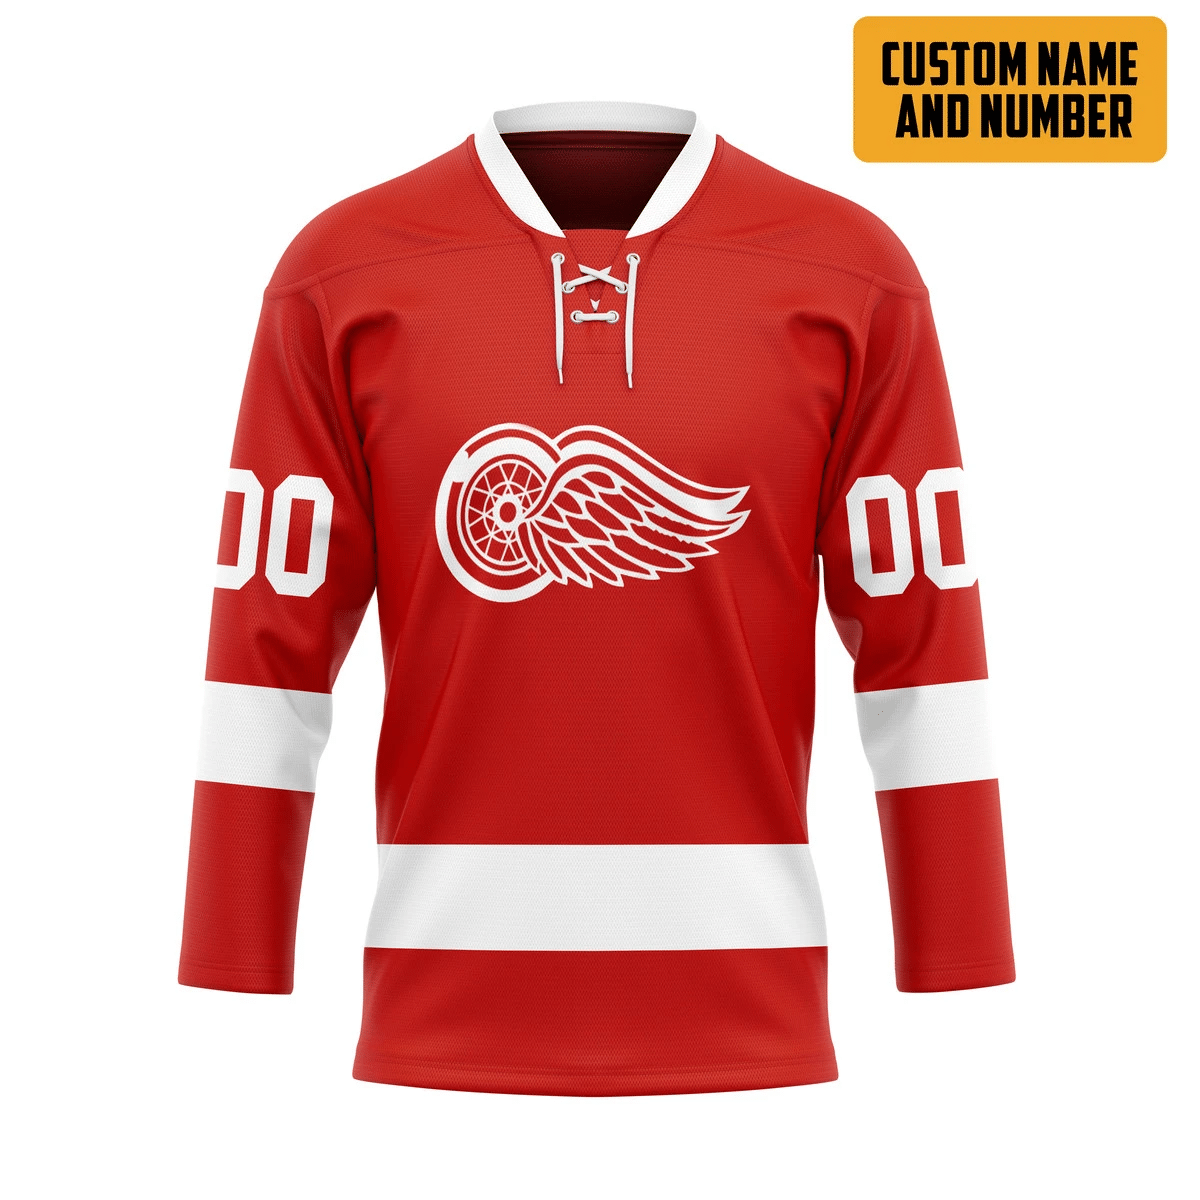 Choosing a hockey jersey is not as difficult as you think. 88